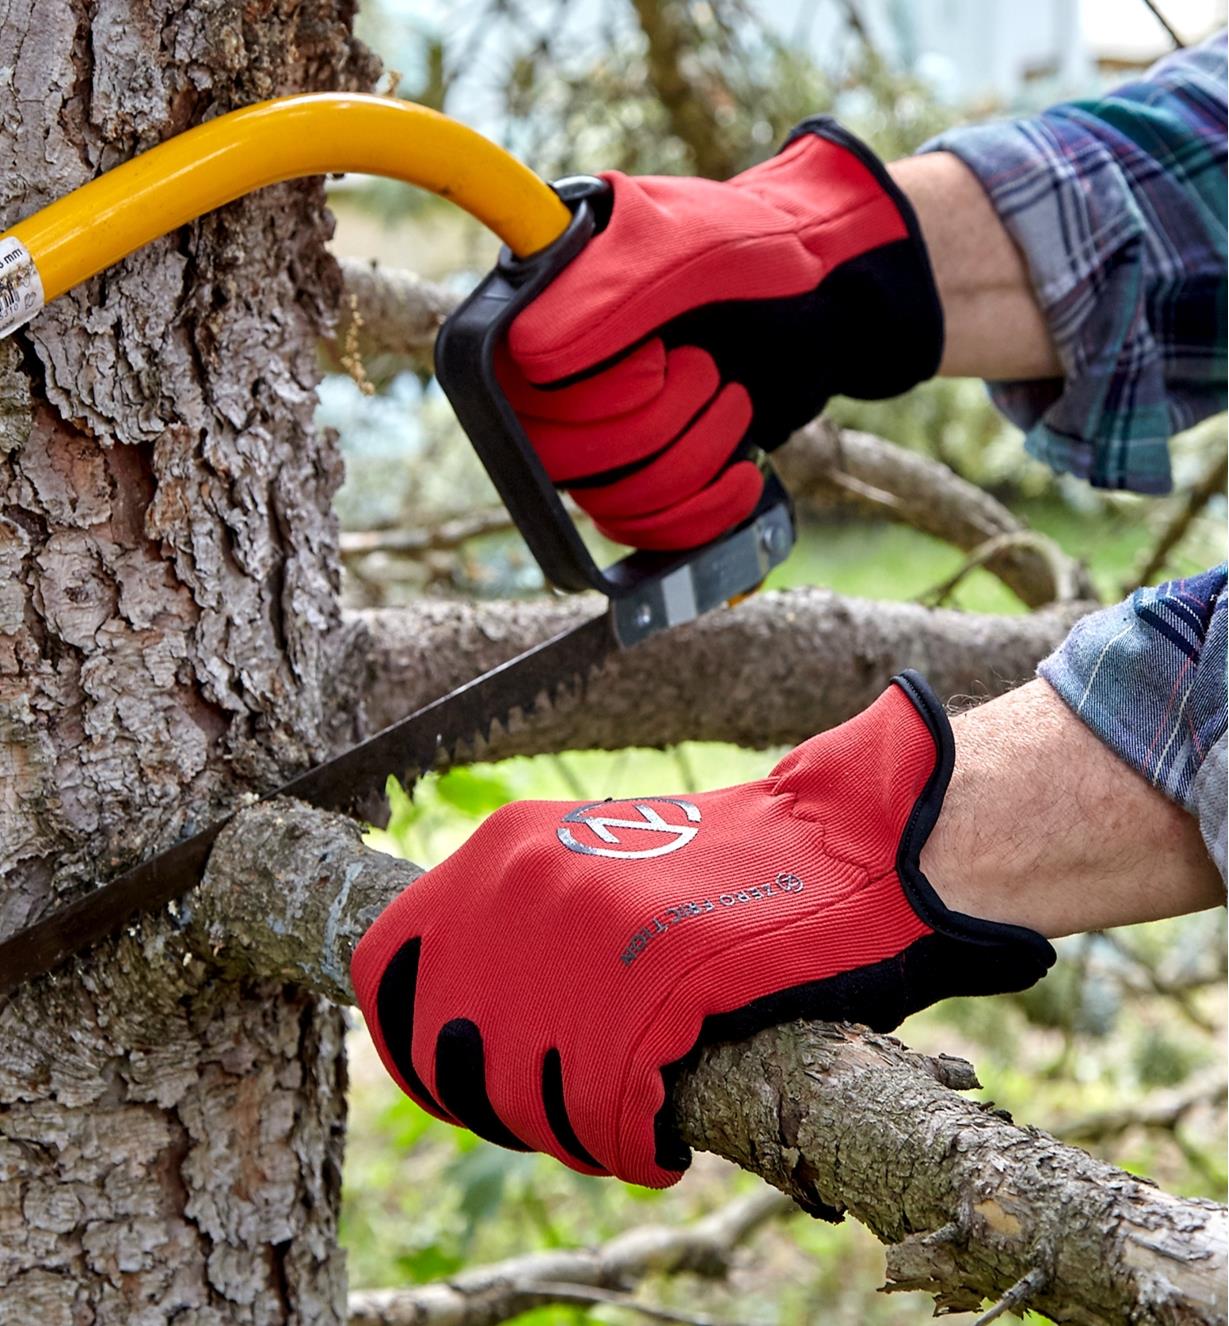 A person wears a pair of Universal-Fit gloves while using a bow saw to cut a limb from a tree